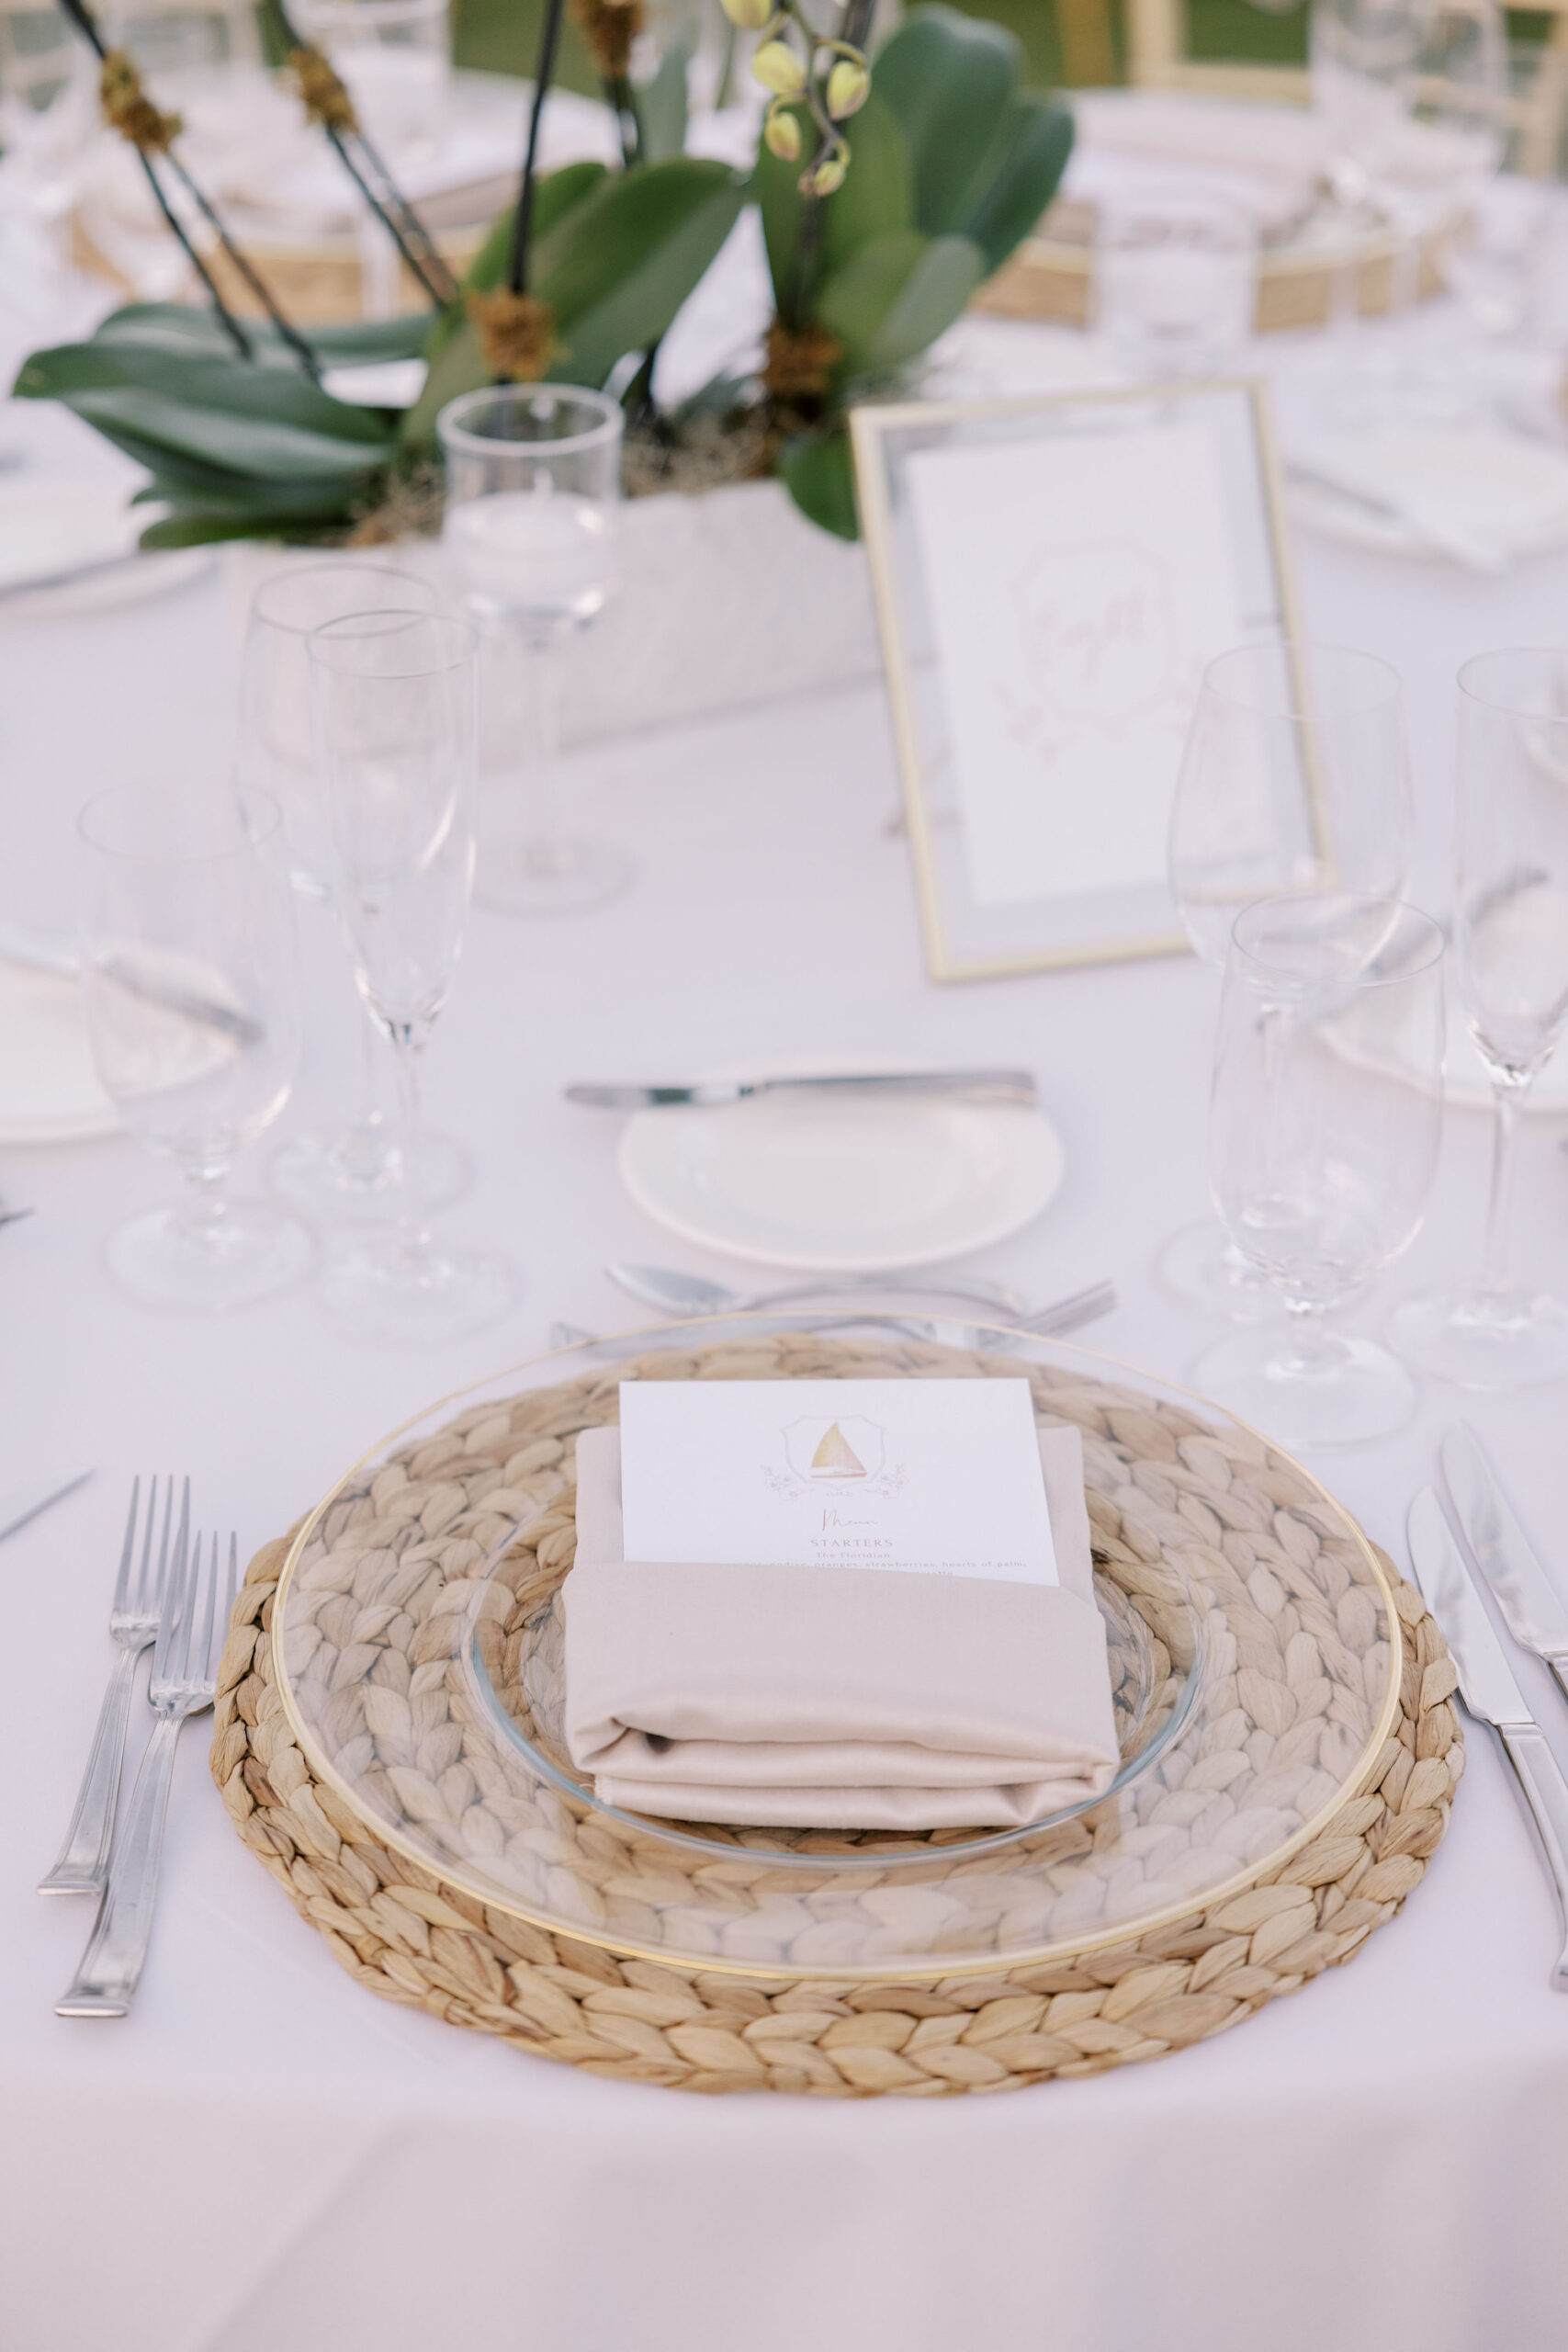 Hyacinth Placemat | Gold Rimmed Charger | Neutral Napkin Linen | Boho White Florida Wedding Reception Inspiration